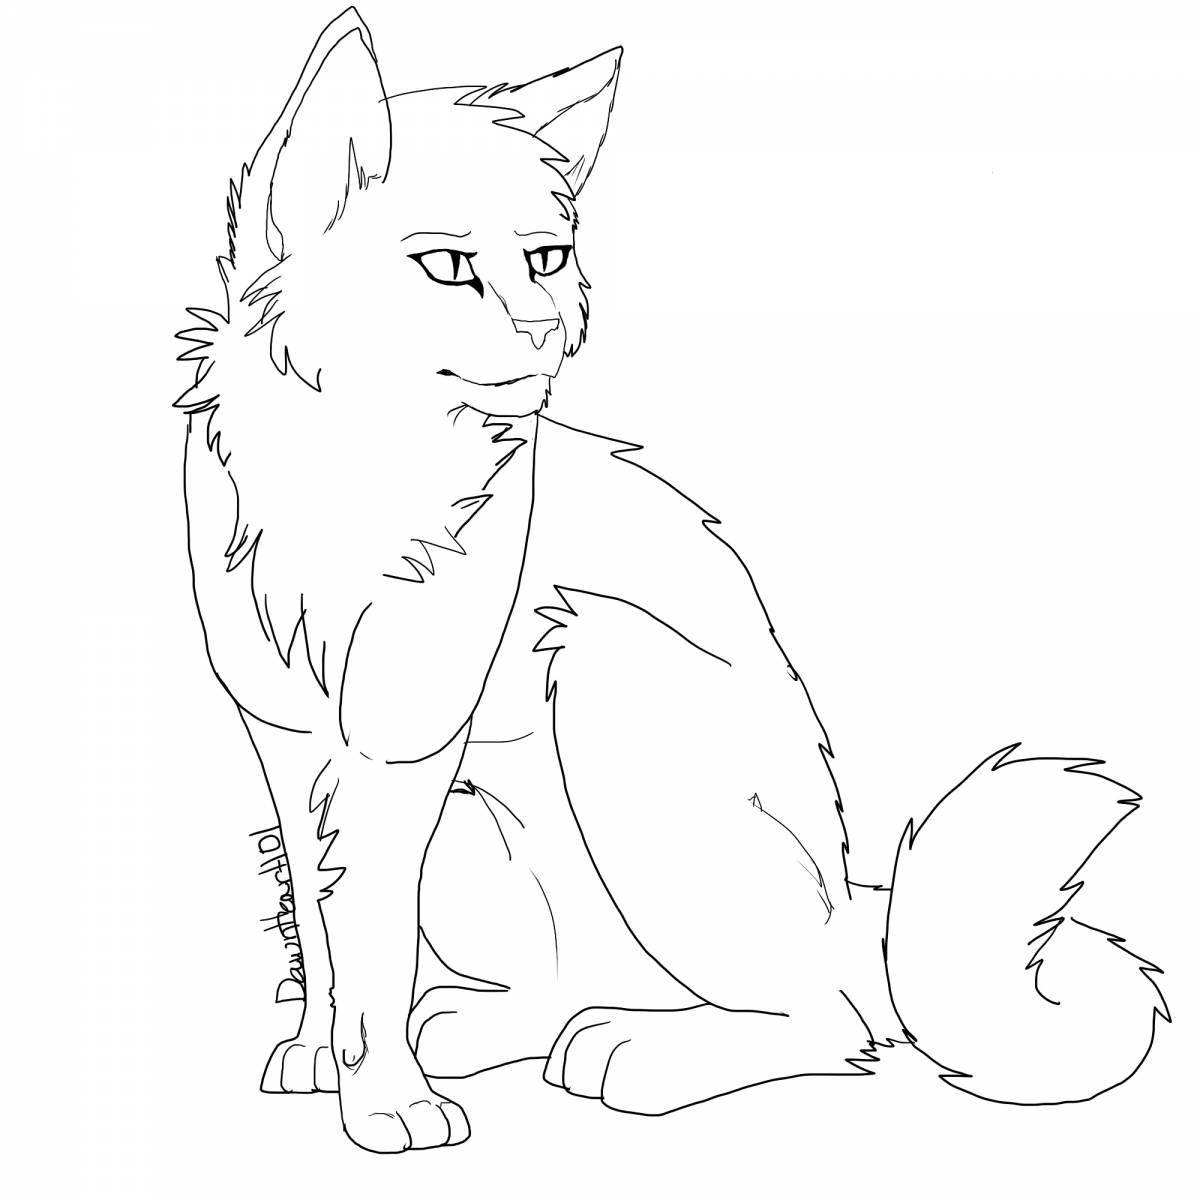 Adorable beach cat coloring page